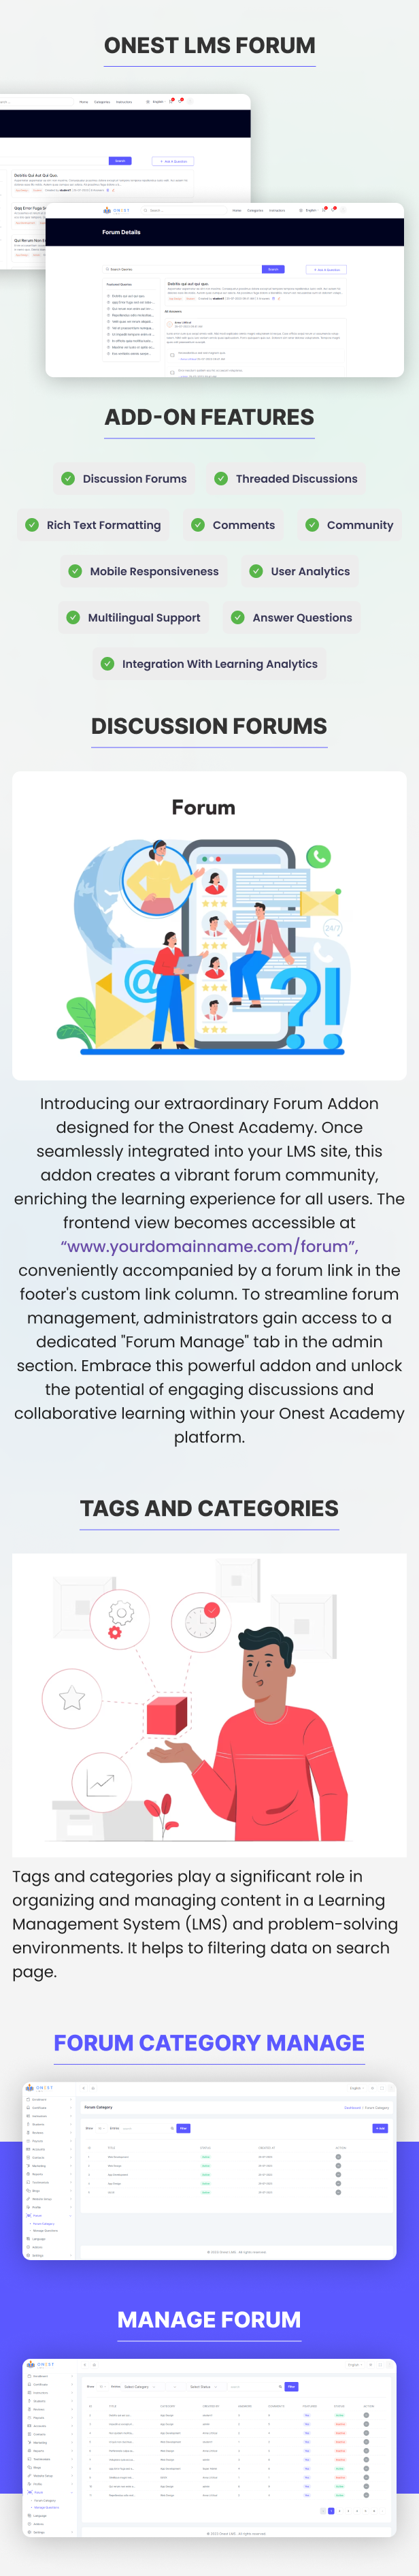 Forum Discussion Addon for Onest LMS - 1